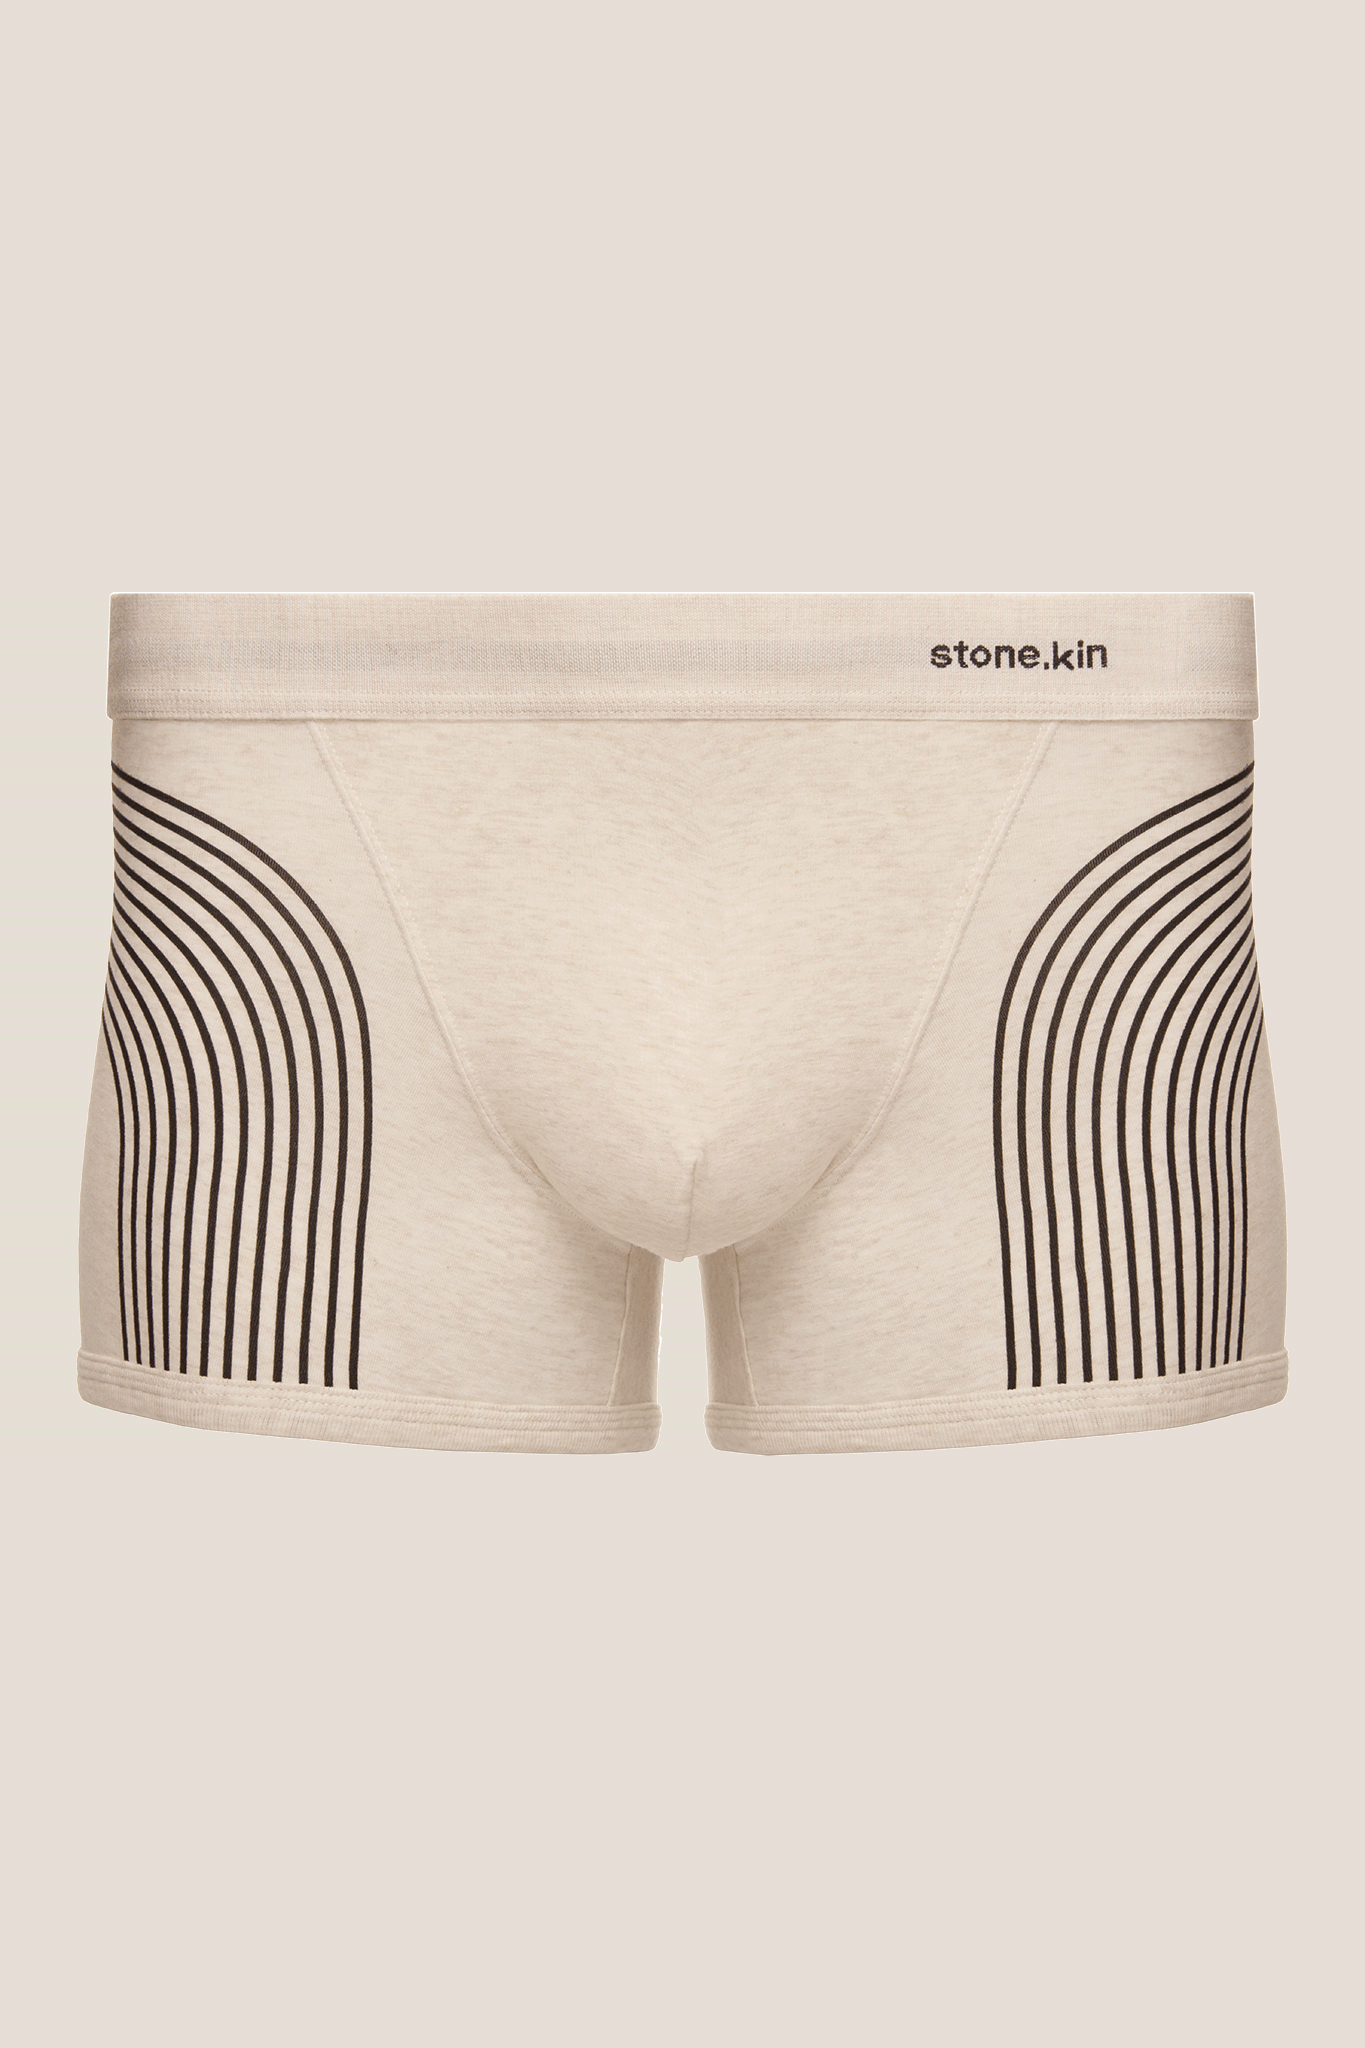 Stone.kin - Boxer Brief in Cotton Jersey - Tar with Lines